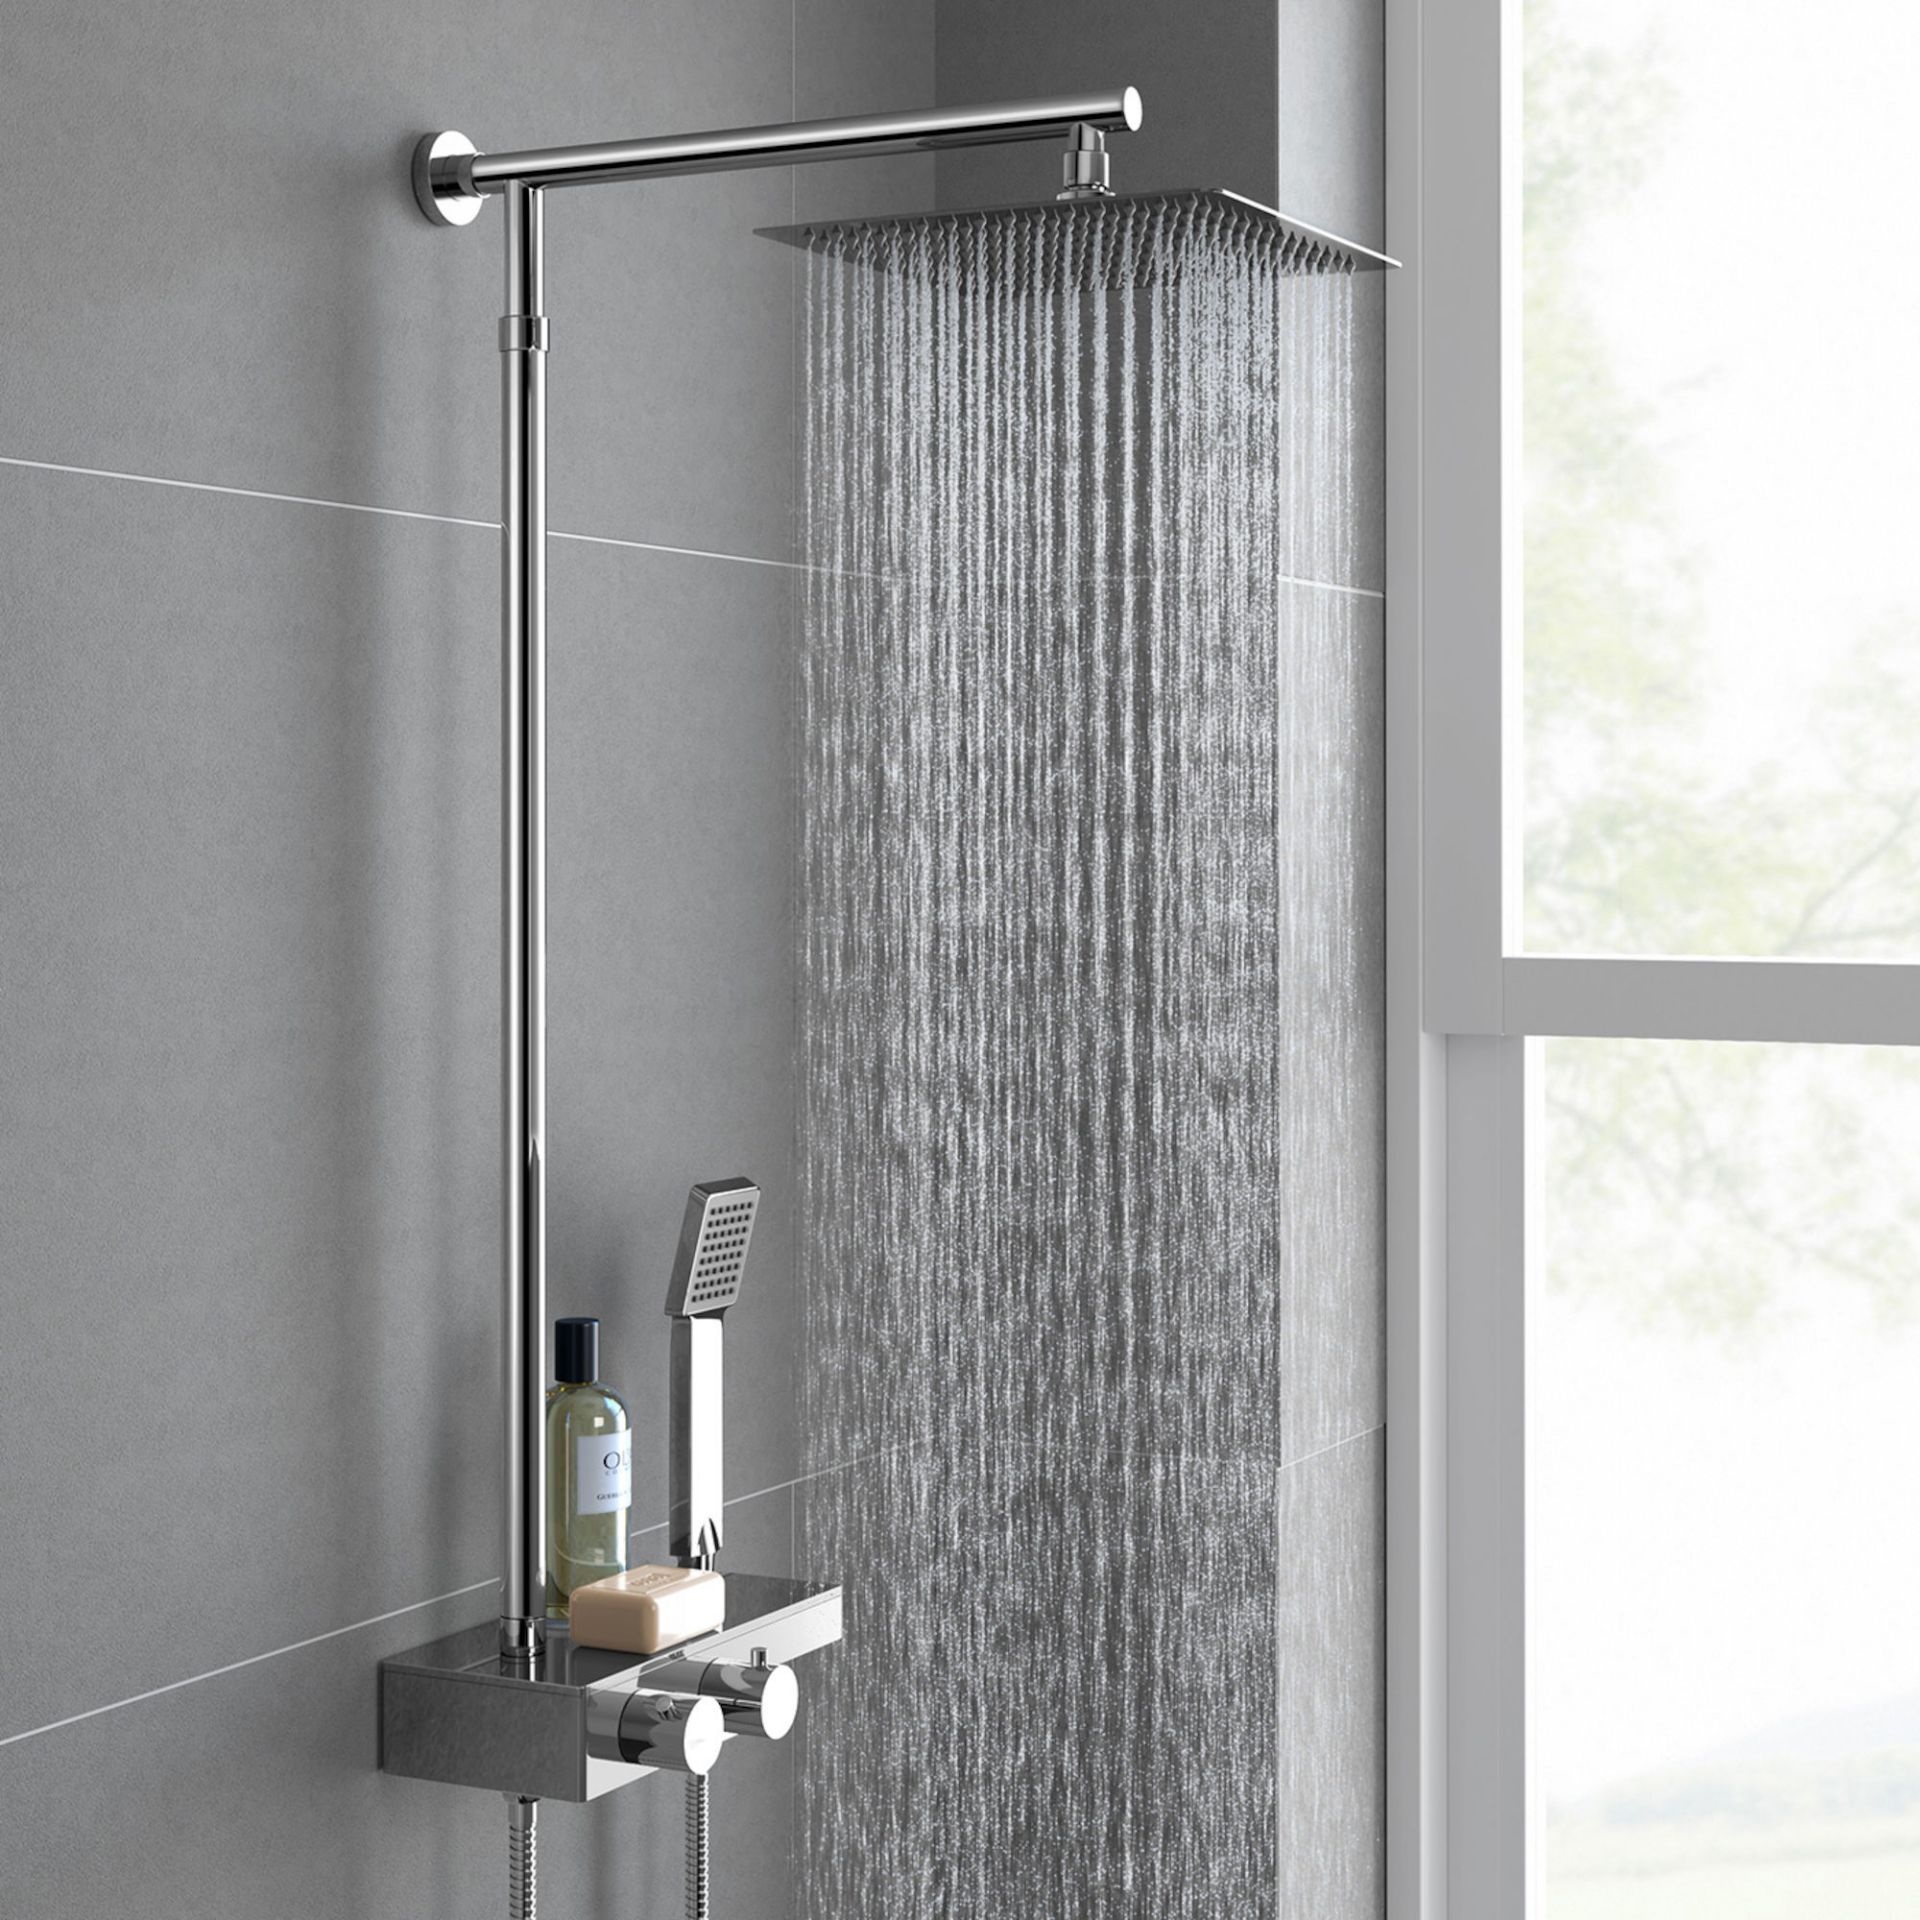 (OS207) Square Exposed Thermostatic Shower Shelf, Kit & Large Head. RRP £349.99. Style meets